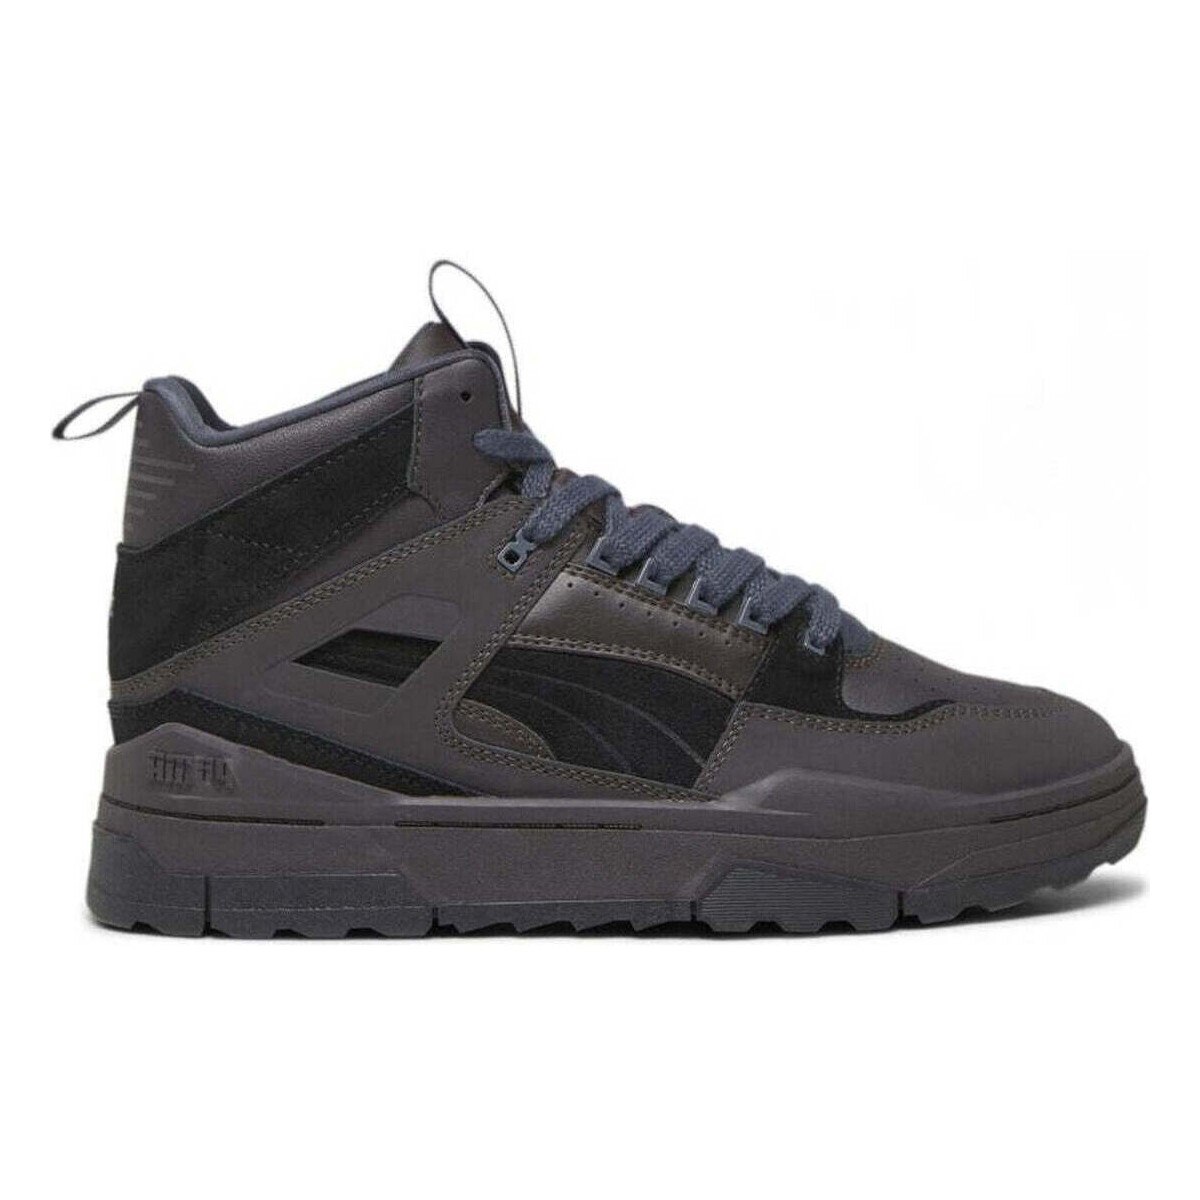 Chaussures Homme Boots Puma slipstream hi xtreme booties Gris